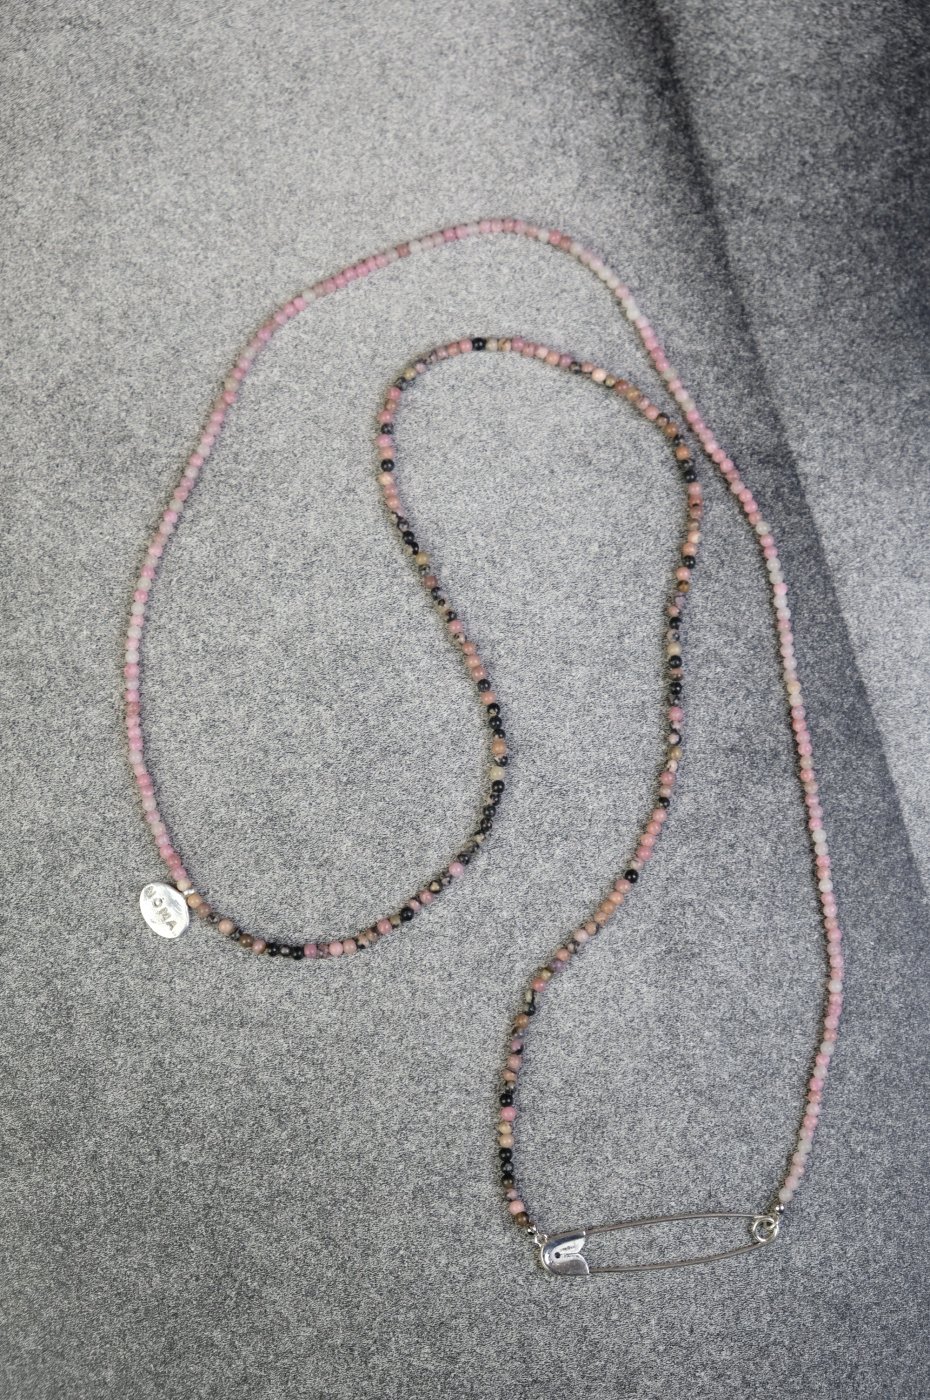 NOMA t.d. -ノーマティーディ-PIN & BEADS NECKLACE-SILVER / BROWN x PINK